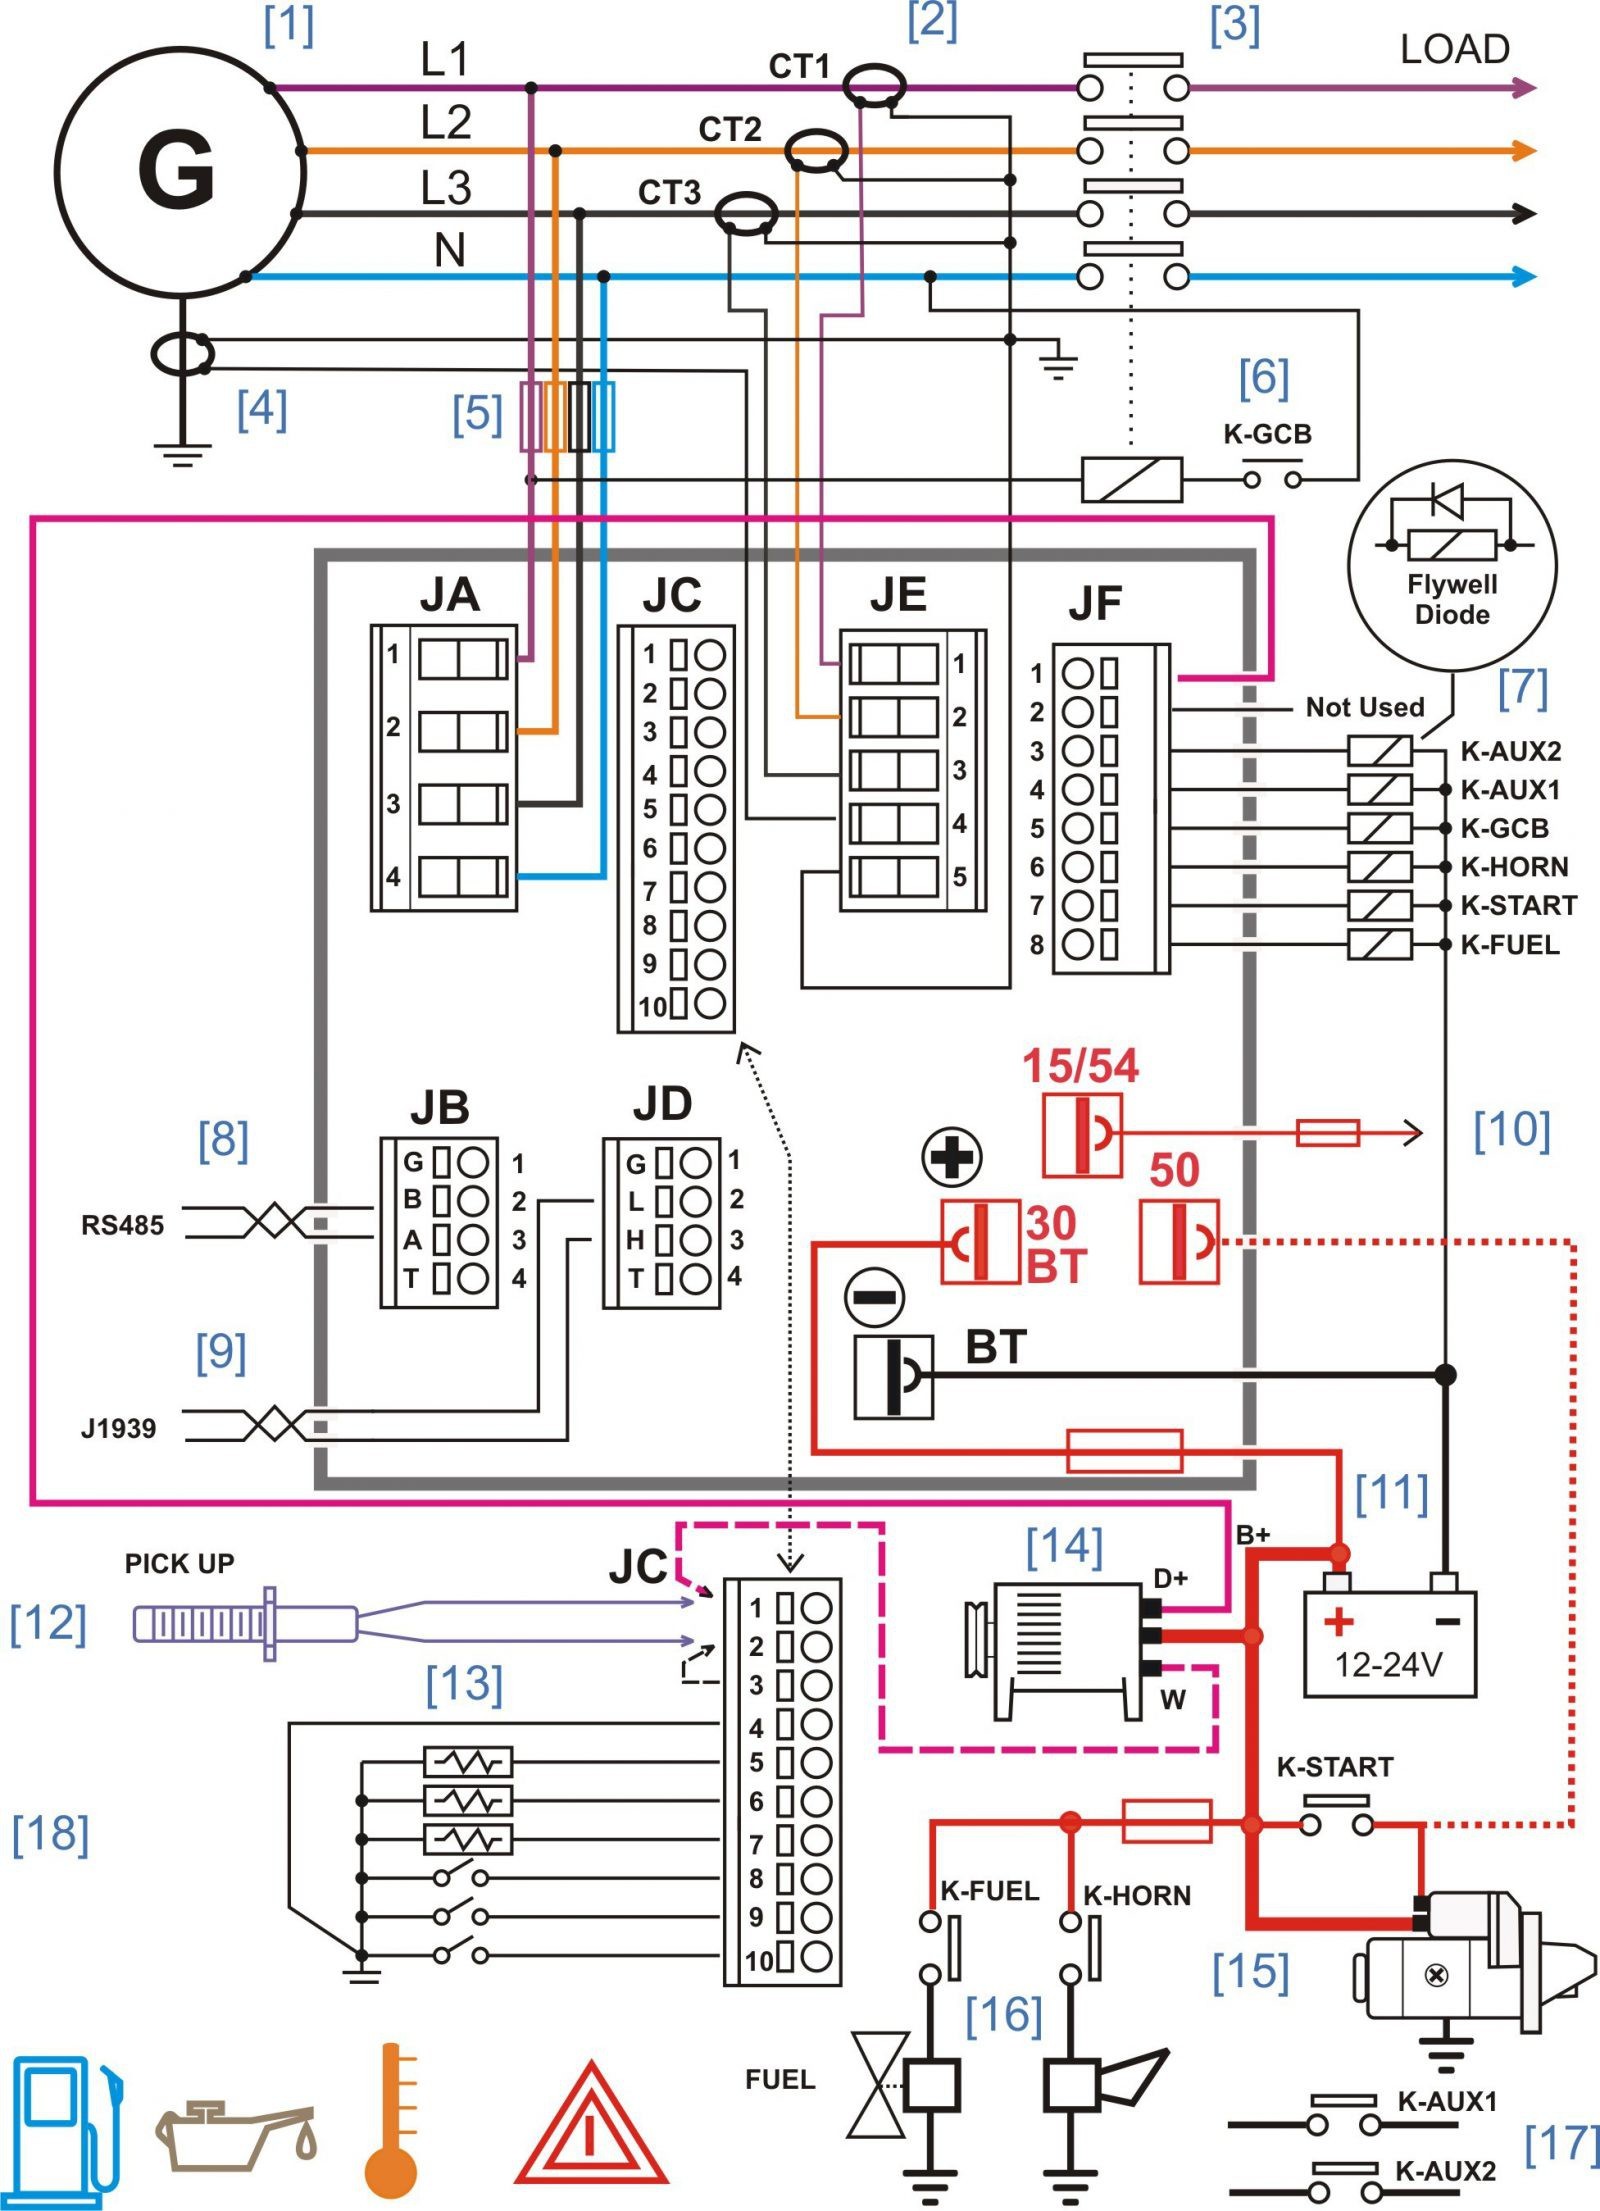 Car Electrical Diagram Lovely Car Stereo Wiring Diagram Diagram Of Car Electrical Diagram